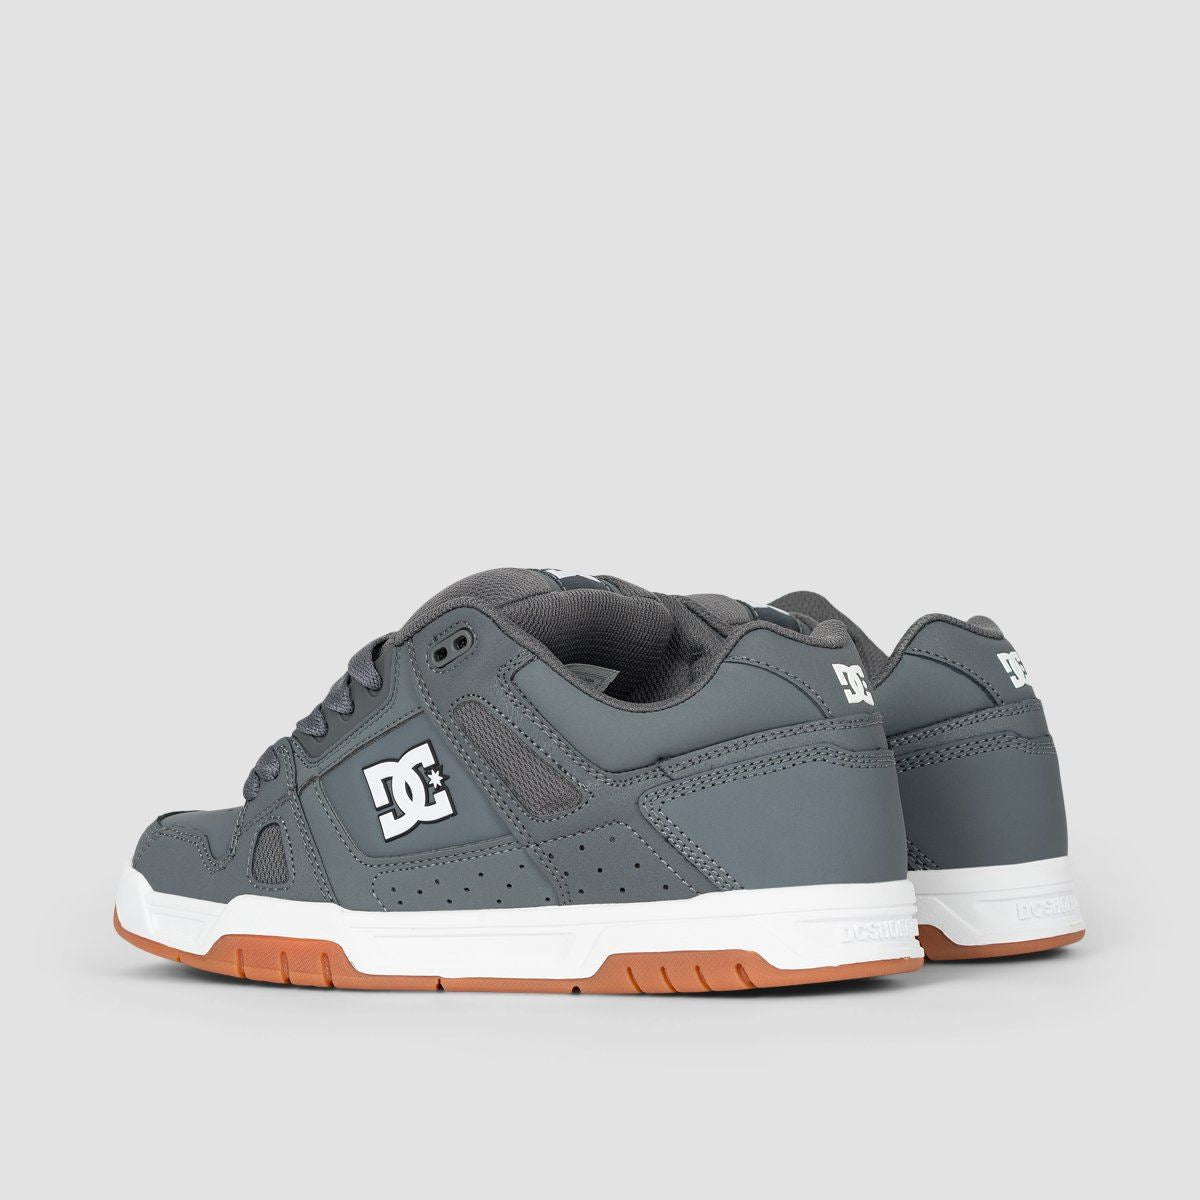 DC Stag Shoes - Grey/Gum